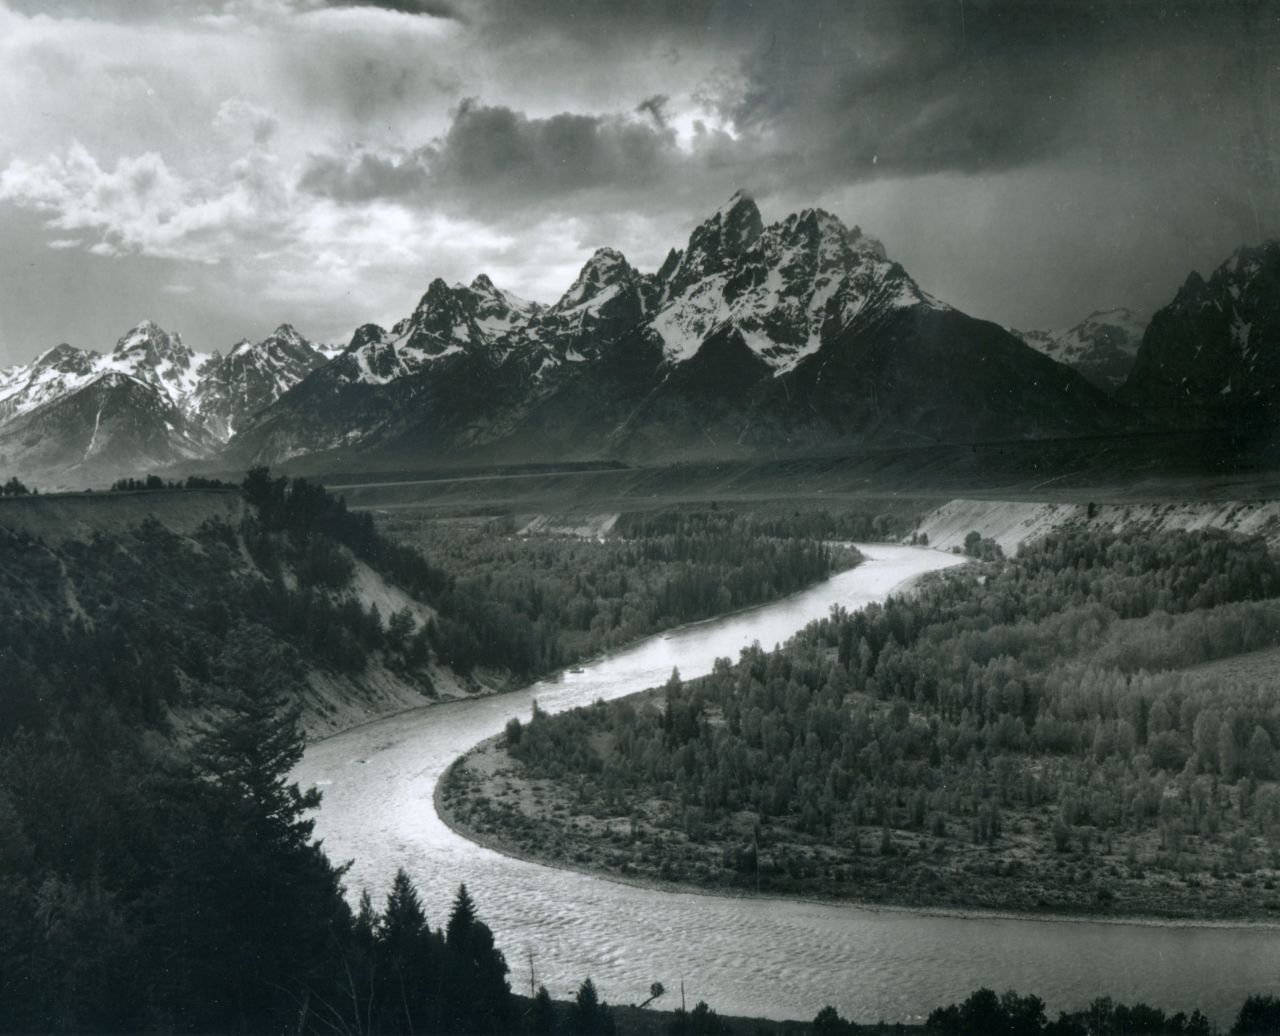 A quick pause here, to admire the view across the Snake River as taken by Ansel Adams in 1941.